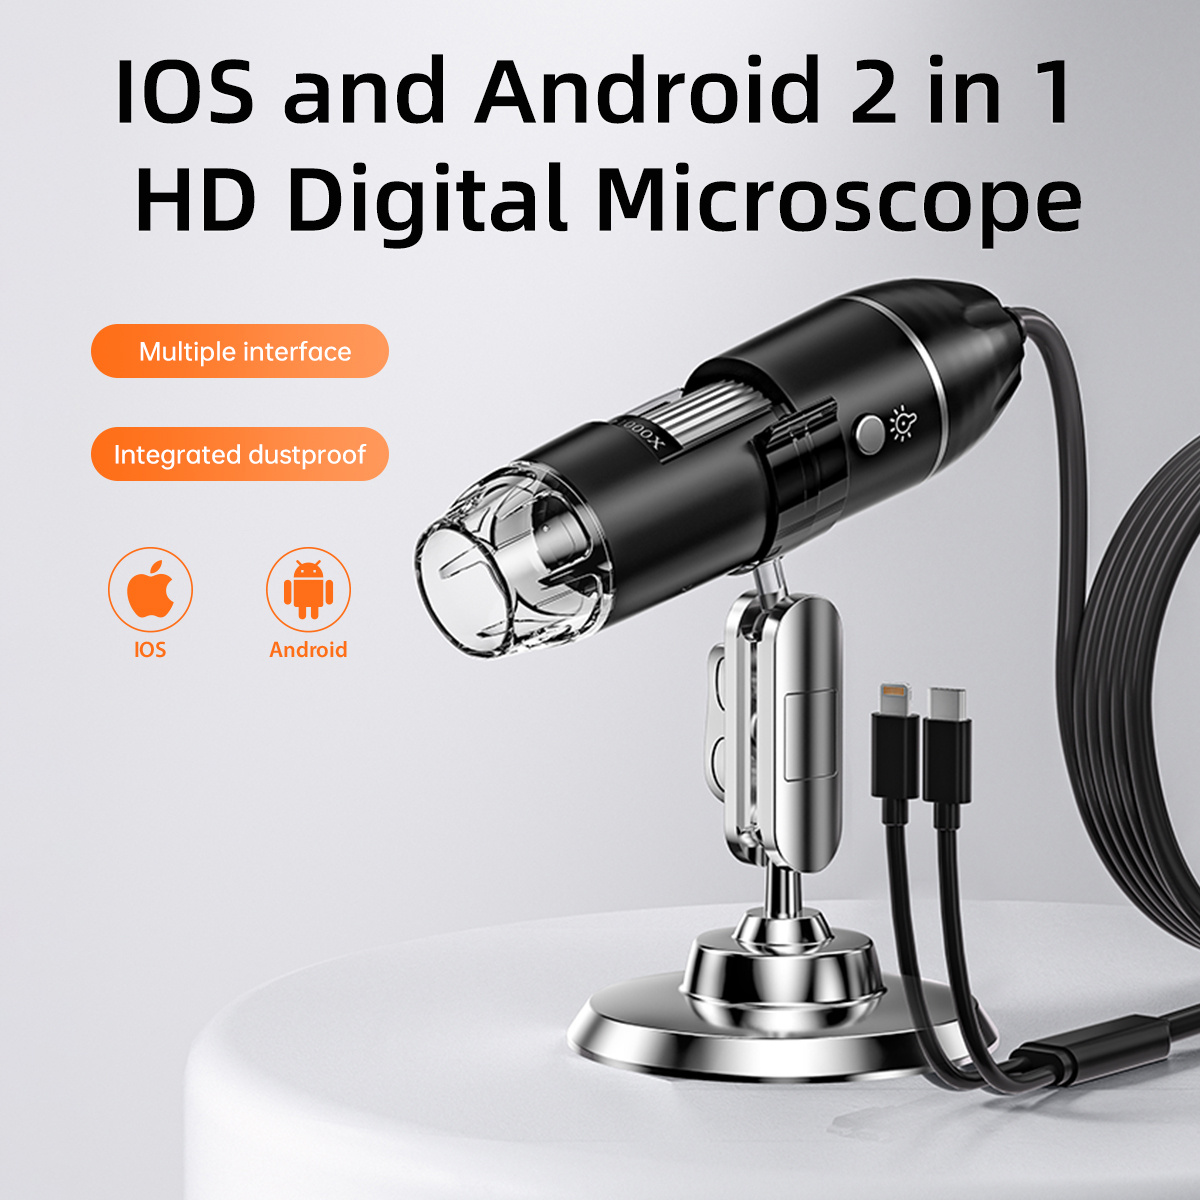 INSKAM 321-p 1600X 2MP Digital Microscope Hand Held Adjustable Microscope Electronic Camera 8 LED Magnifier with Stand Microscope Accessories